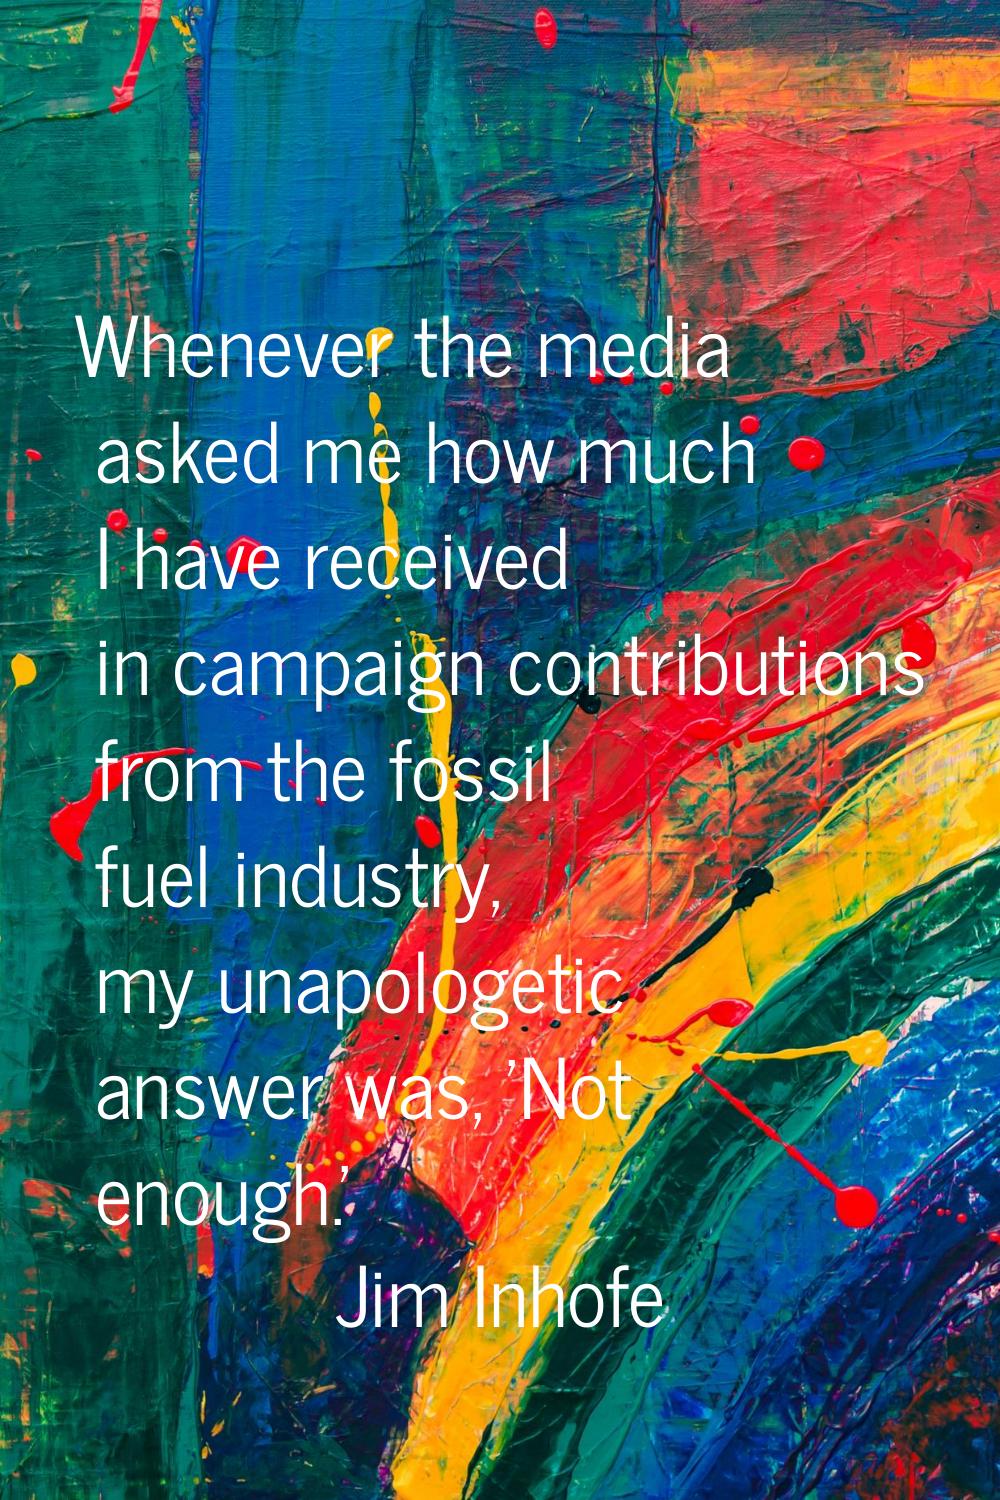 Whenever the media asked me how much I have received in campaign contributions from the fossil fuel